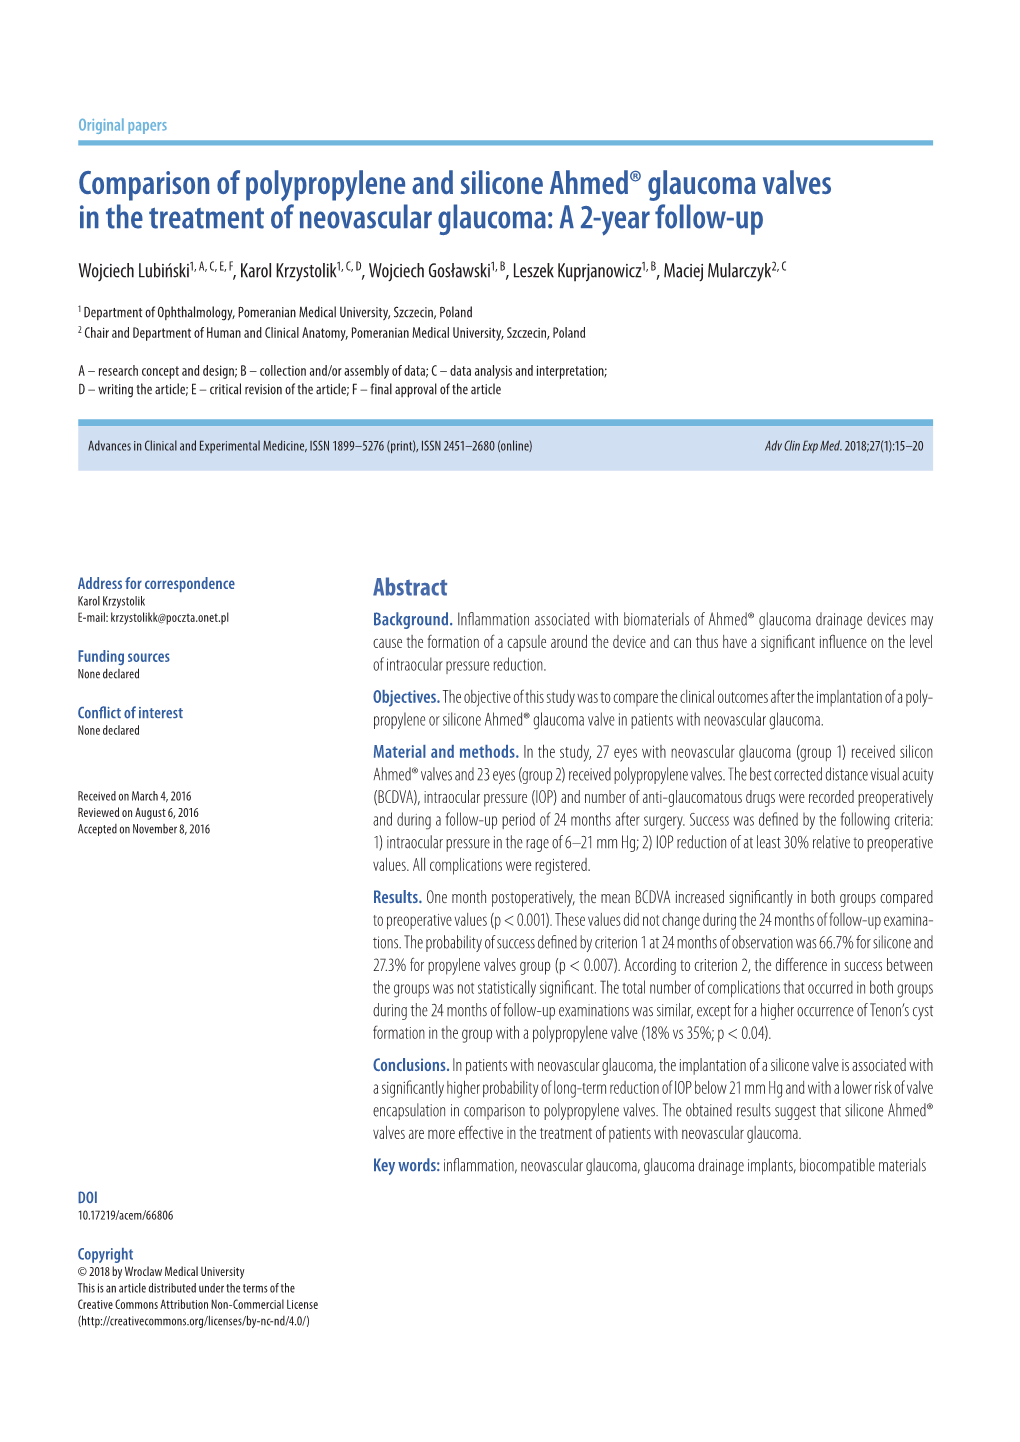 Comparison of Polypropylene and Silicone Ahmed® Glaucoma Valves in the Treatment of Neovascular Glaucoma: a 2-Year Follow-Up